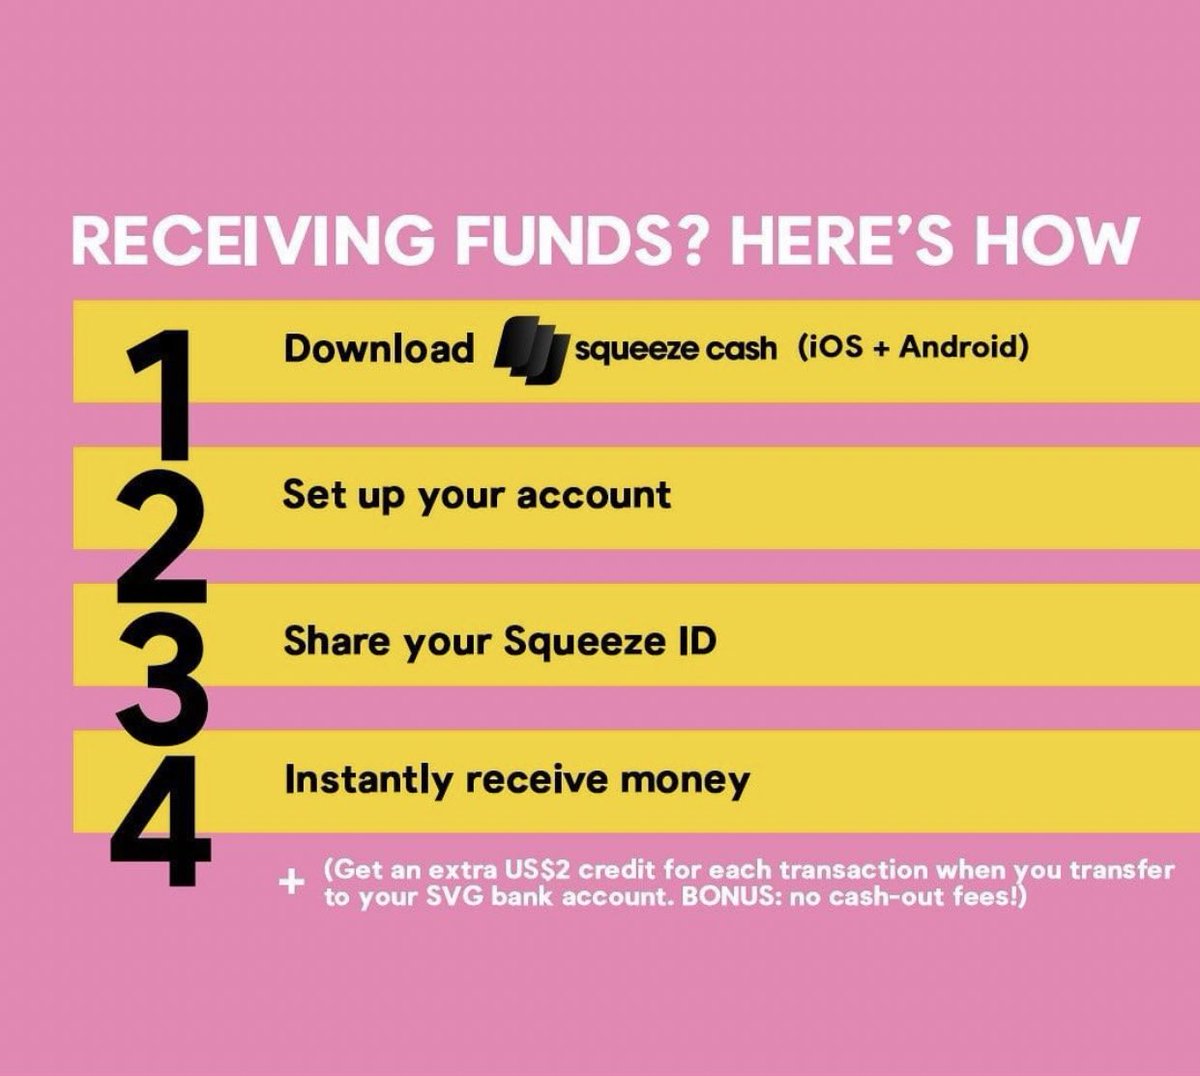 Digital money transfer company  @SqueezeCash has launched a promotion for persons to send/receive funds to/from friends & family overseas. They will add an extra US$2 + will also waive your cash out fee when depositing money to your bank account in SVG.   #LaSoufriereEruption